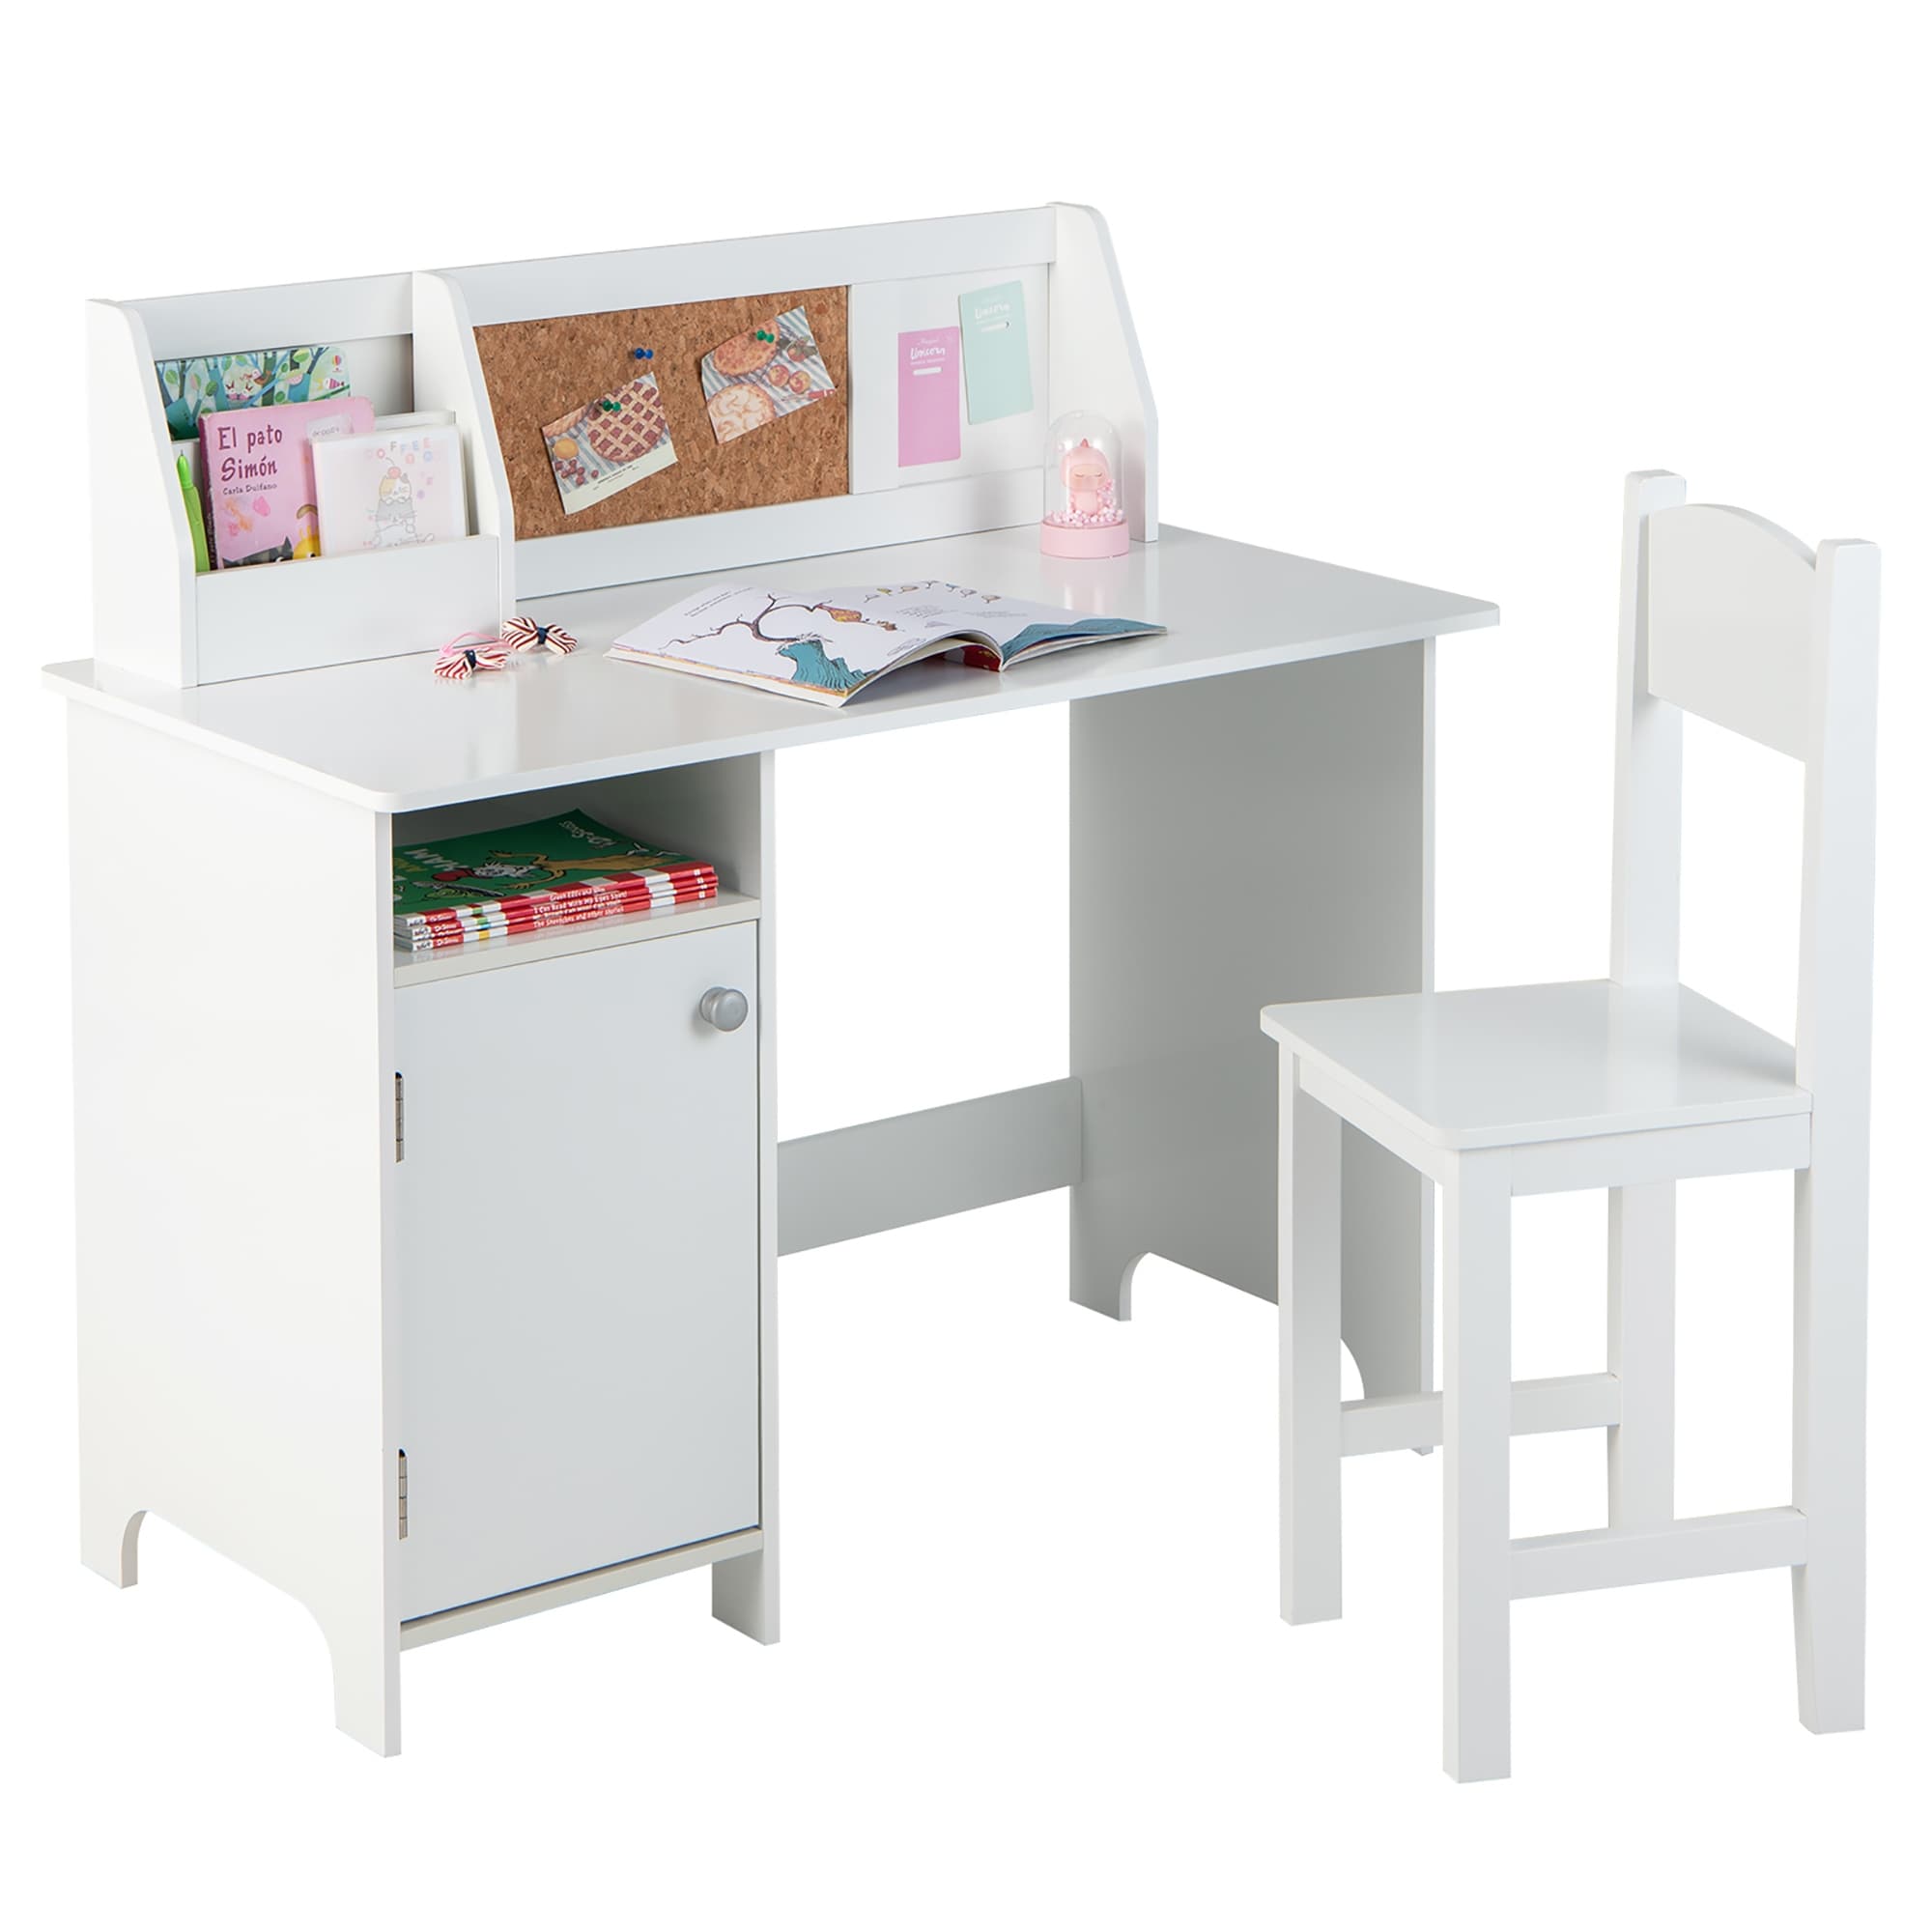 https://ak1.ostkcdn.com/images/products/is/images/direct/fd242d671139c4c65f2a0a4f35233e93c9dd5c1f/Costway-Kids-Desk-and-Chair-Set-Study-Writing-Workstation-with.jpg